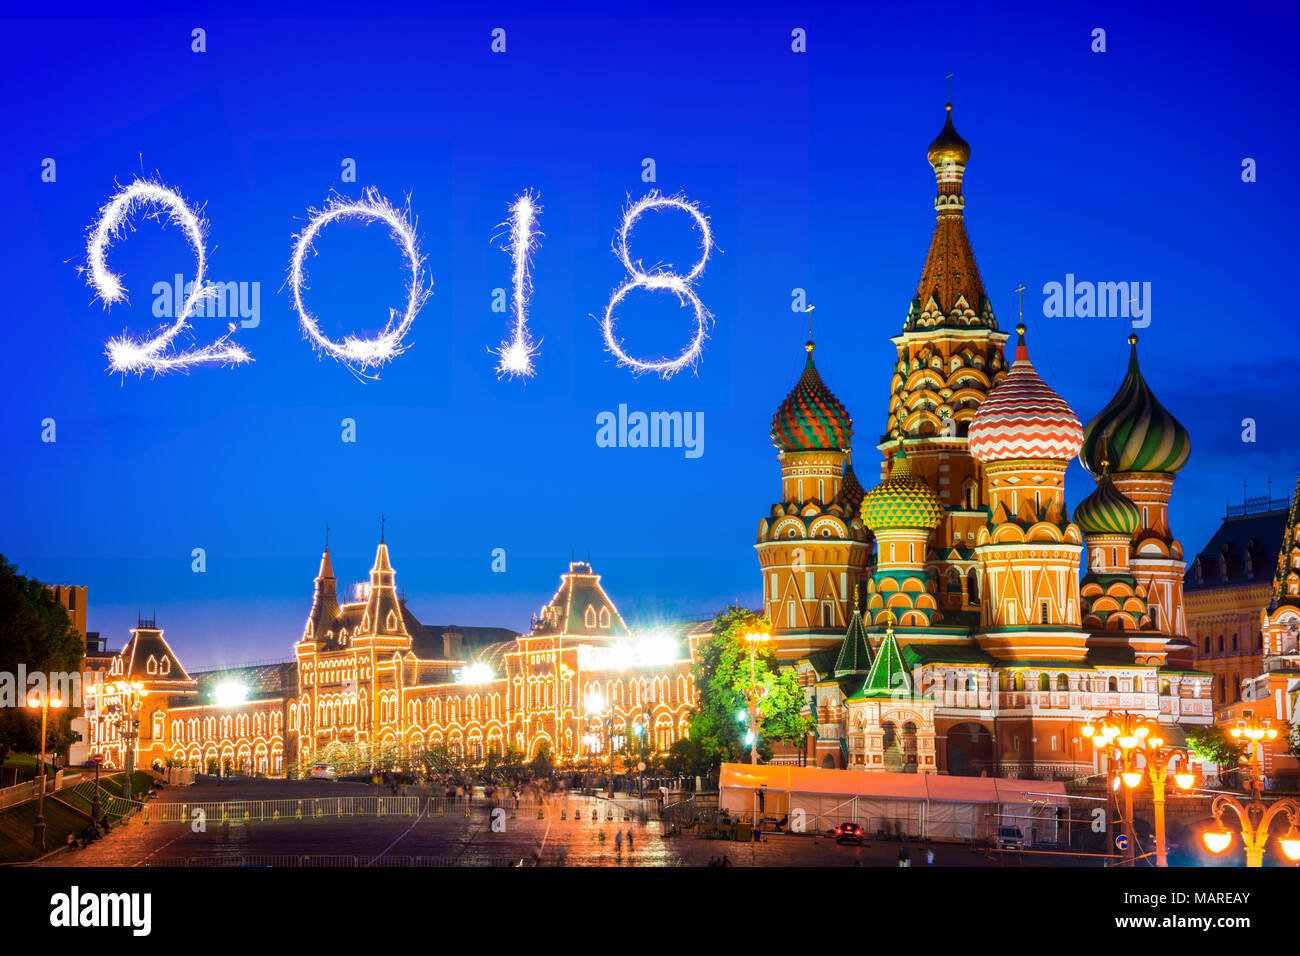 St Basil's cathedral on Red Square at night, 2018 fireworks, Moscow, Russia Stock Photo